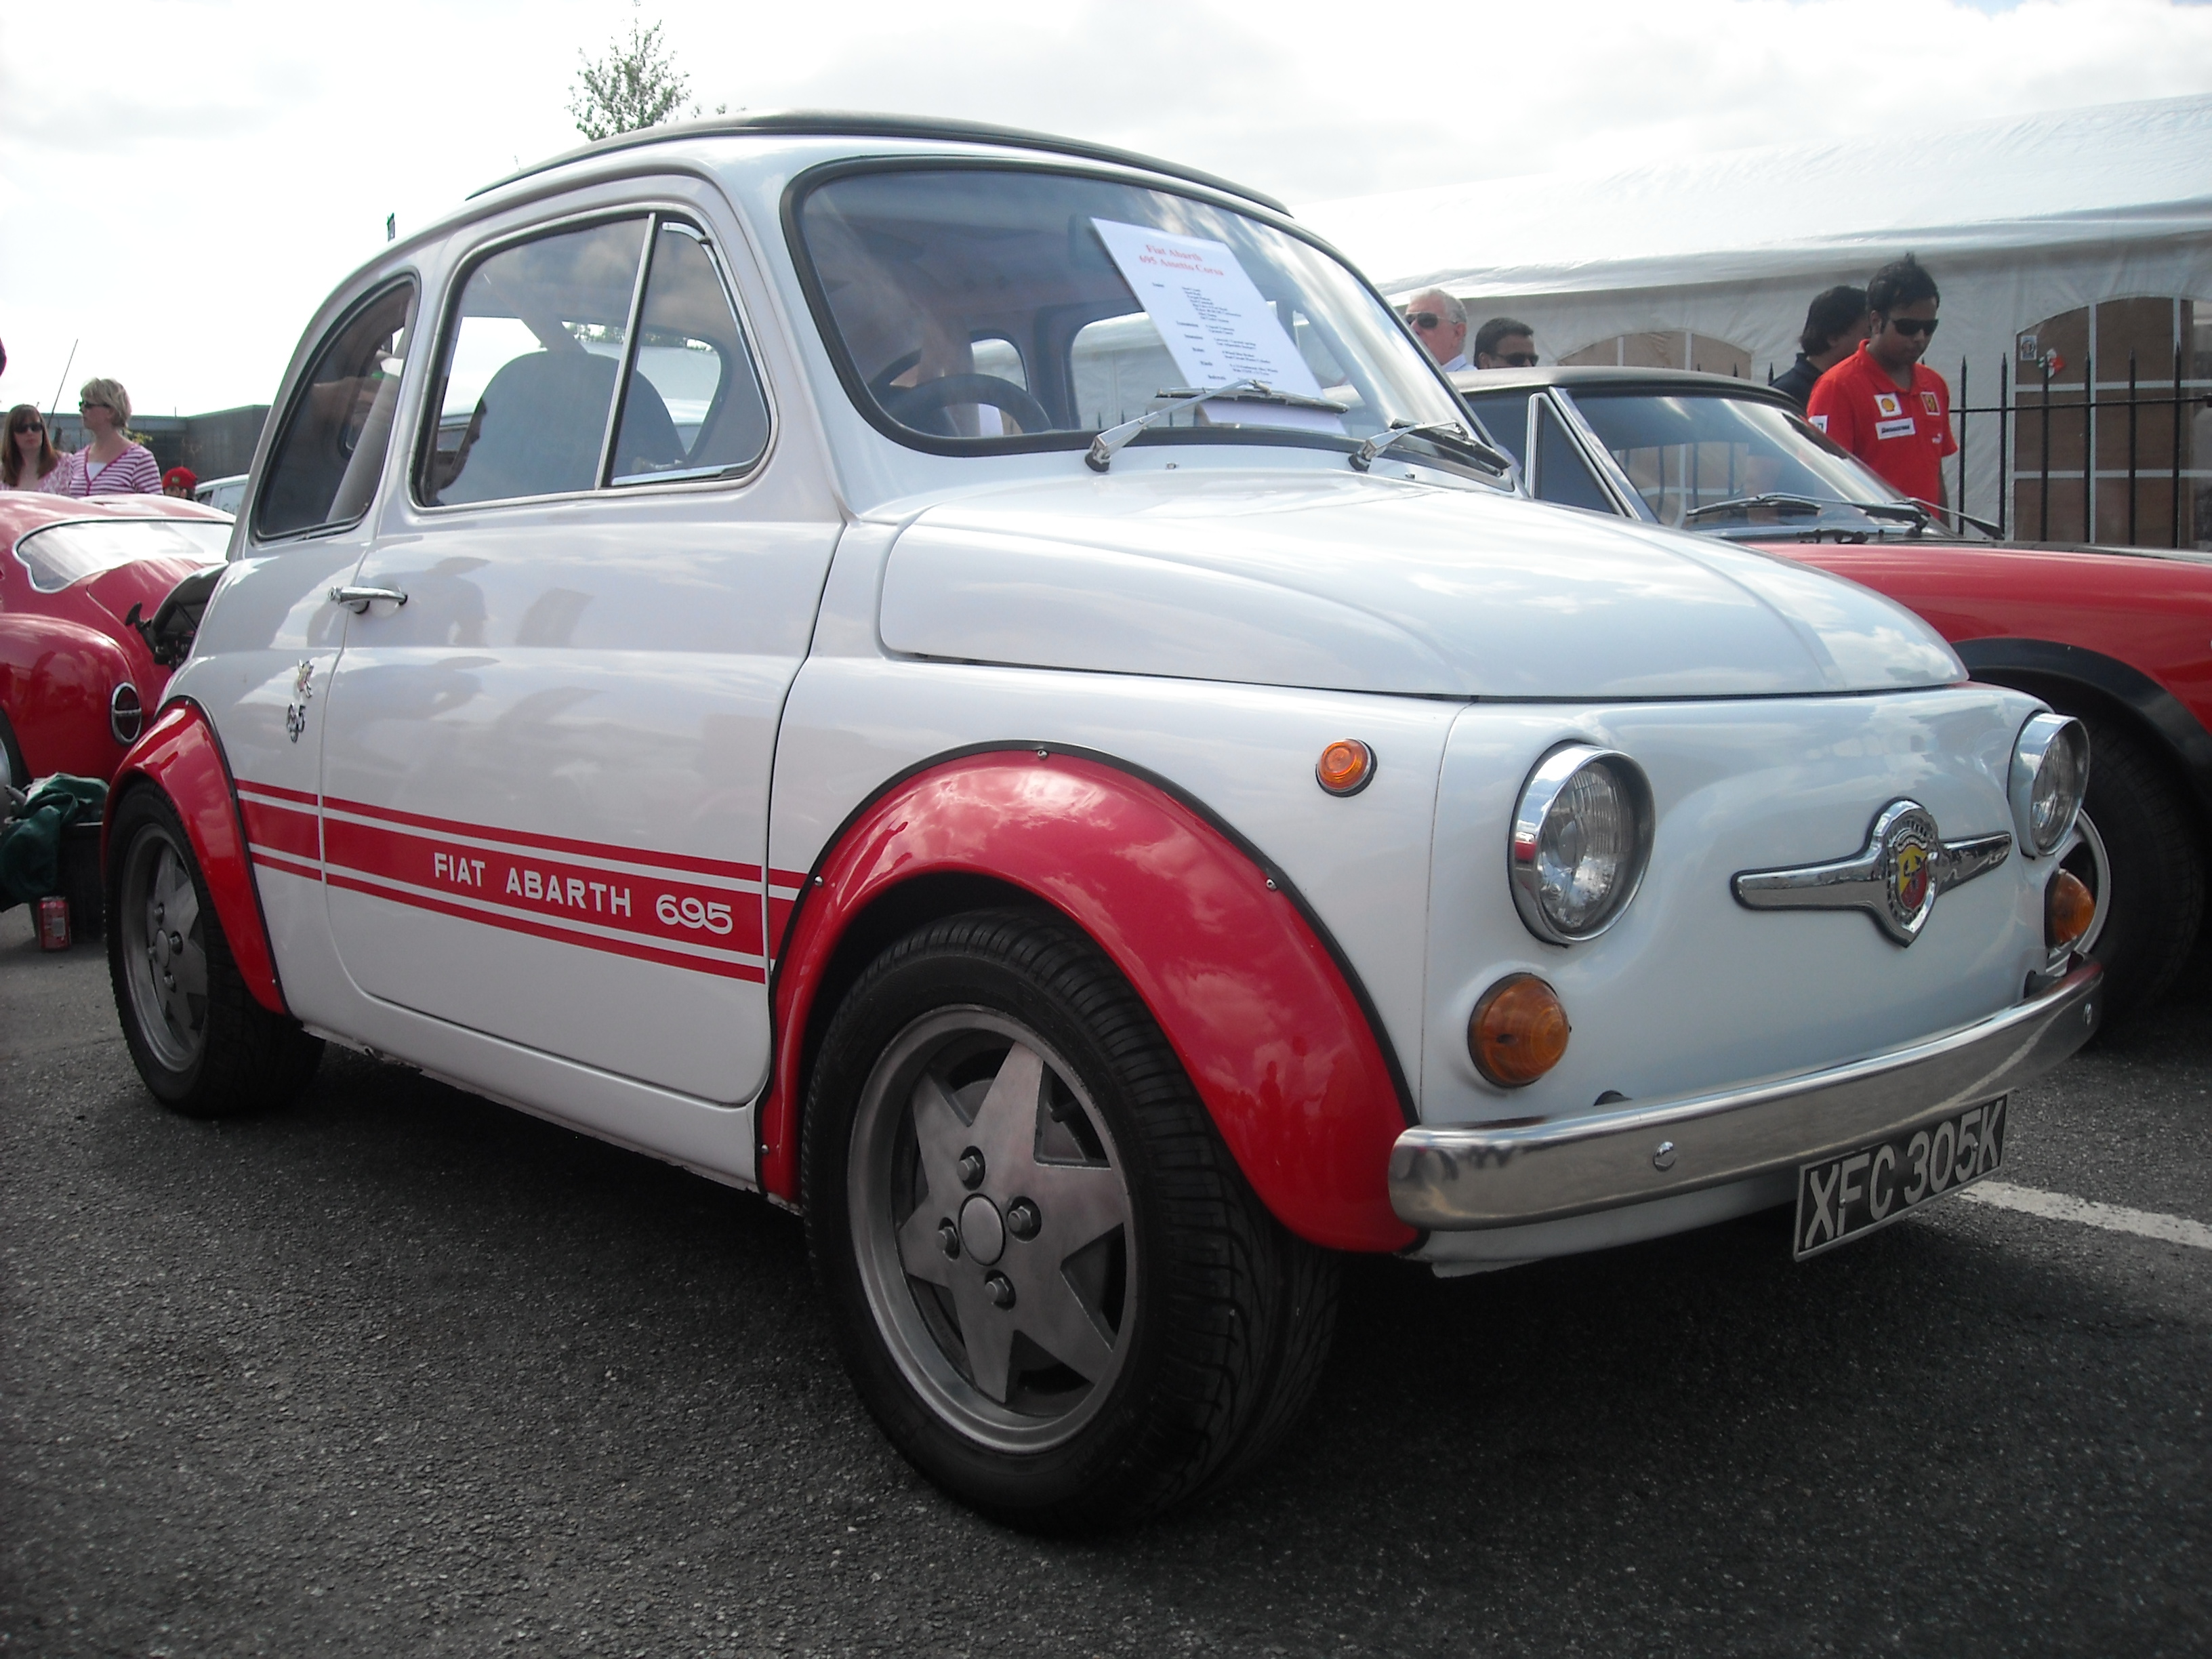 Fiat Abarth 695 Assetto Corsa | Flickr - Photo Sharing!